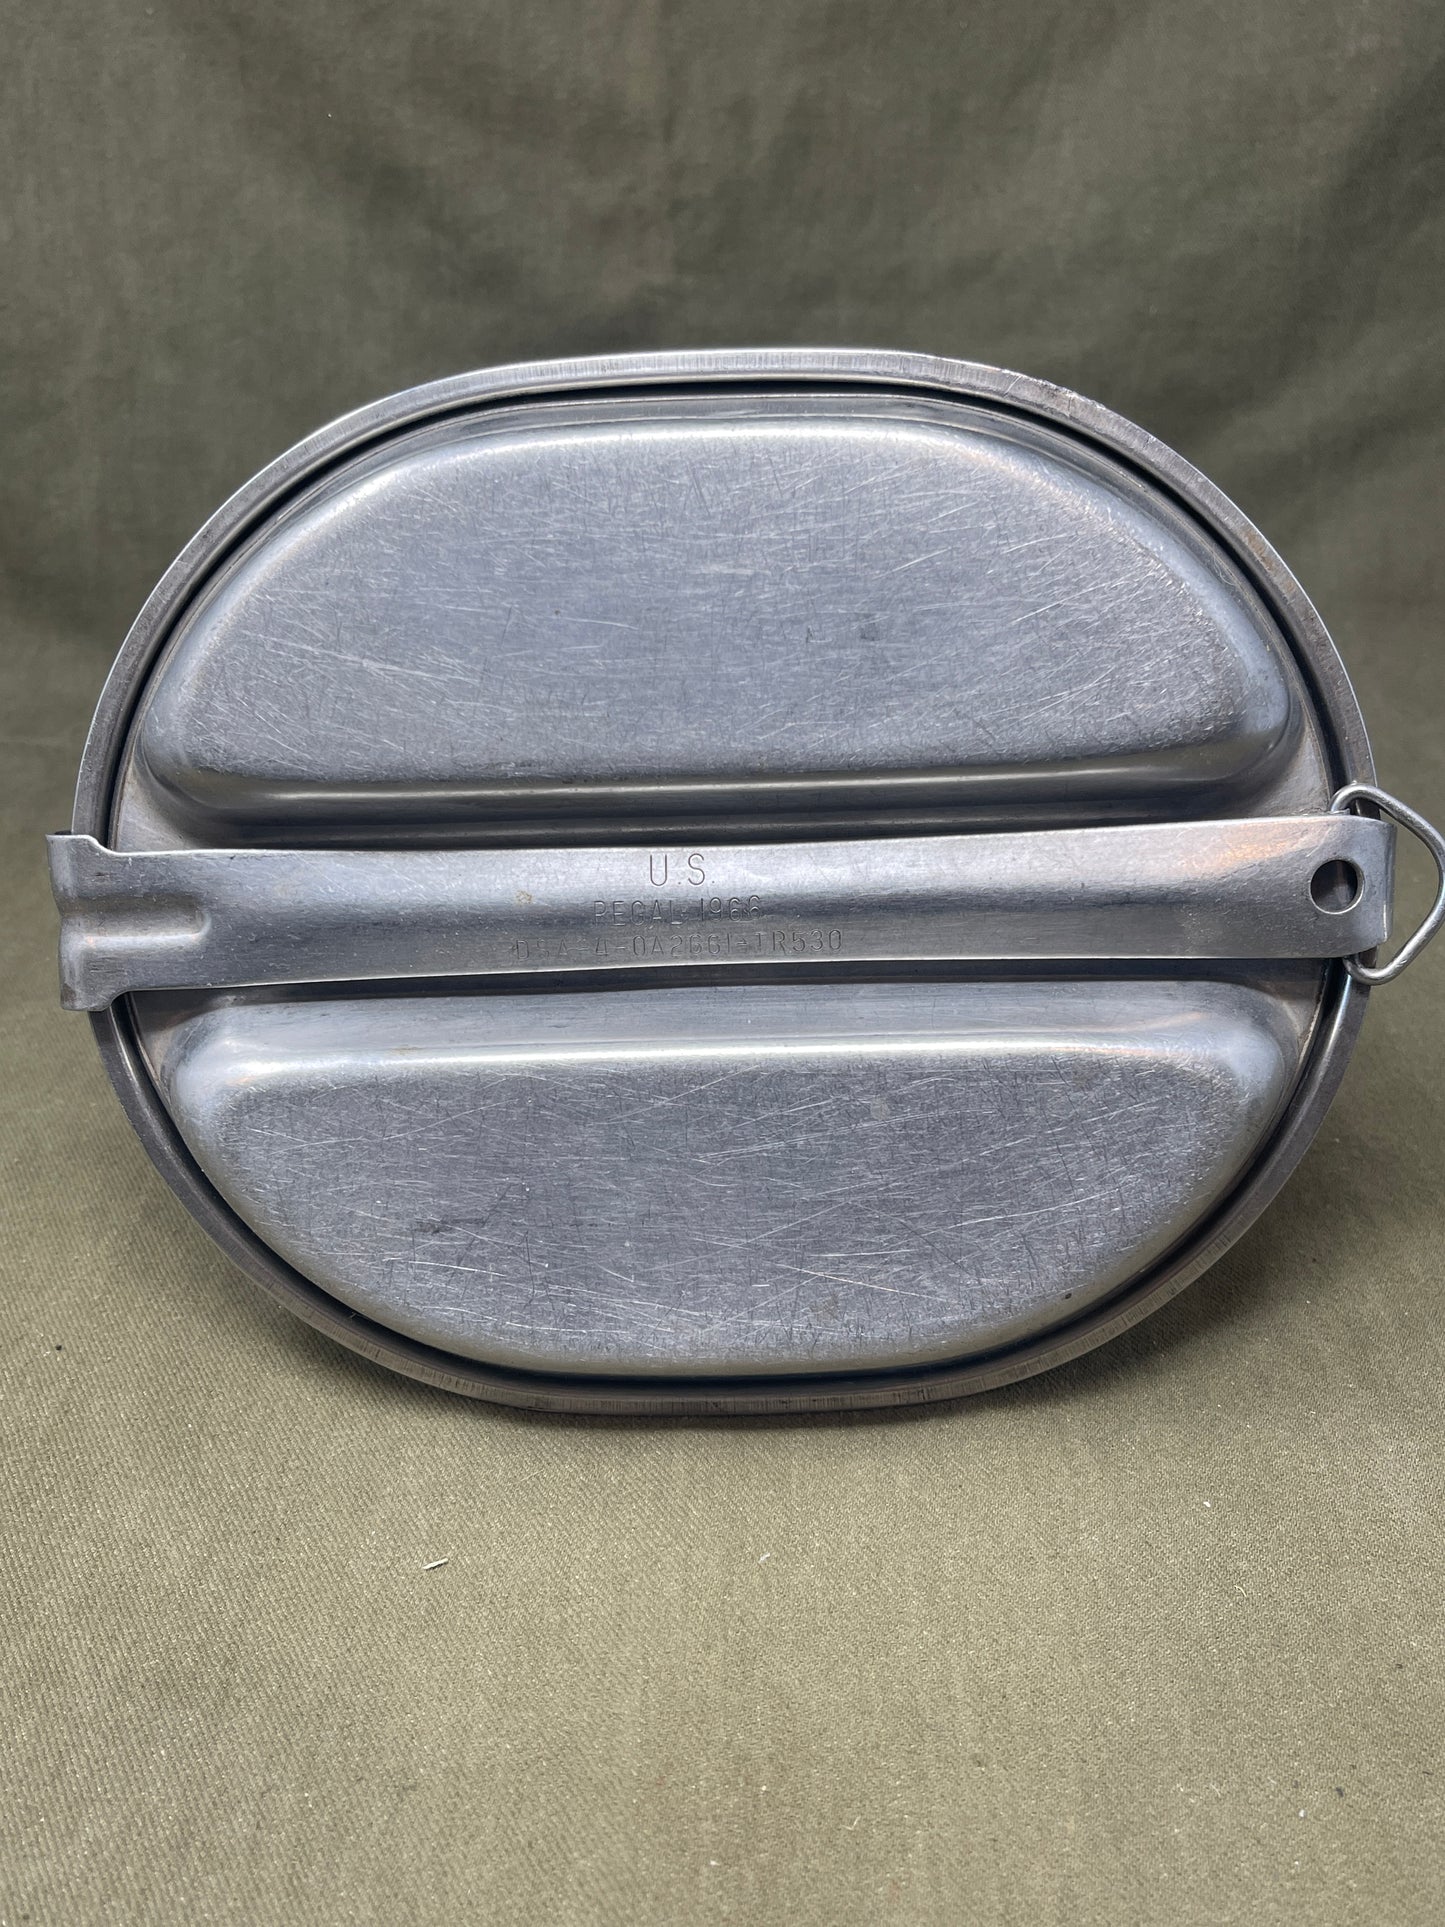 US Army Mess Kit,Dated 1966. Regal